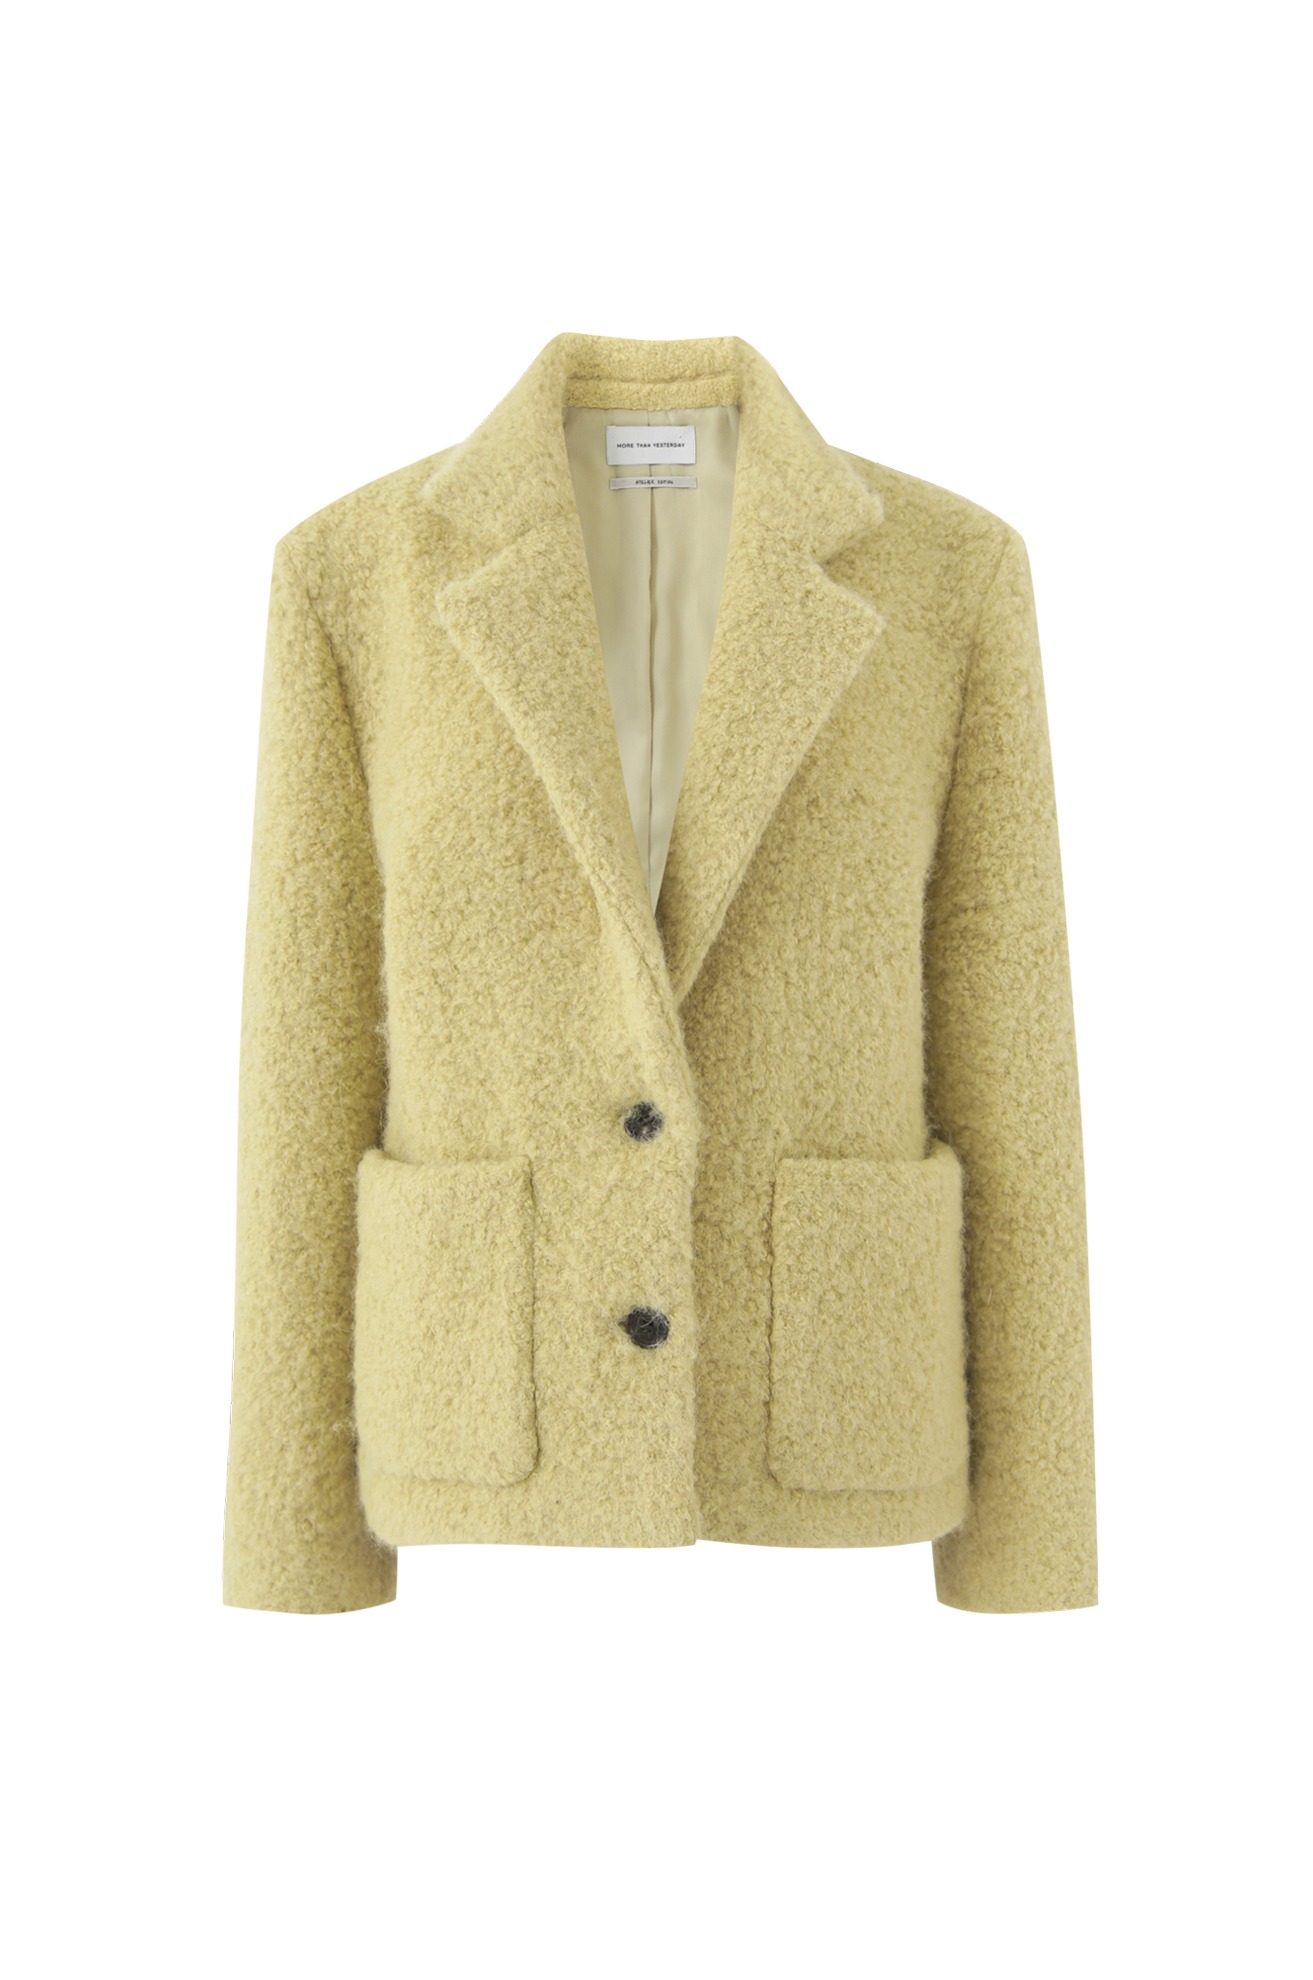 ALPACA WINTER JACKET (YELLOW) <br><sub><mark><strong>ATELIER EDITION </strong></sub><br>